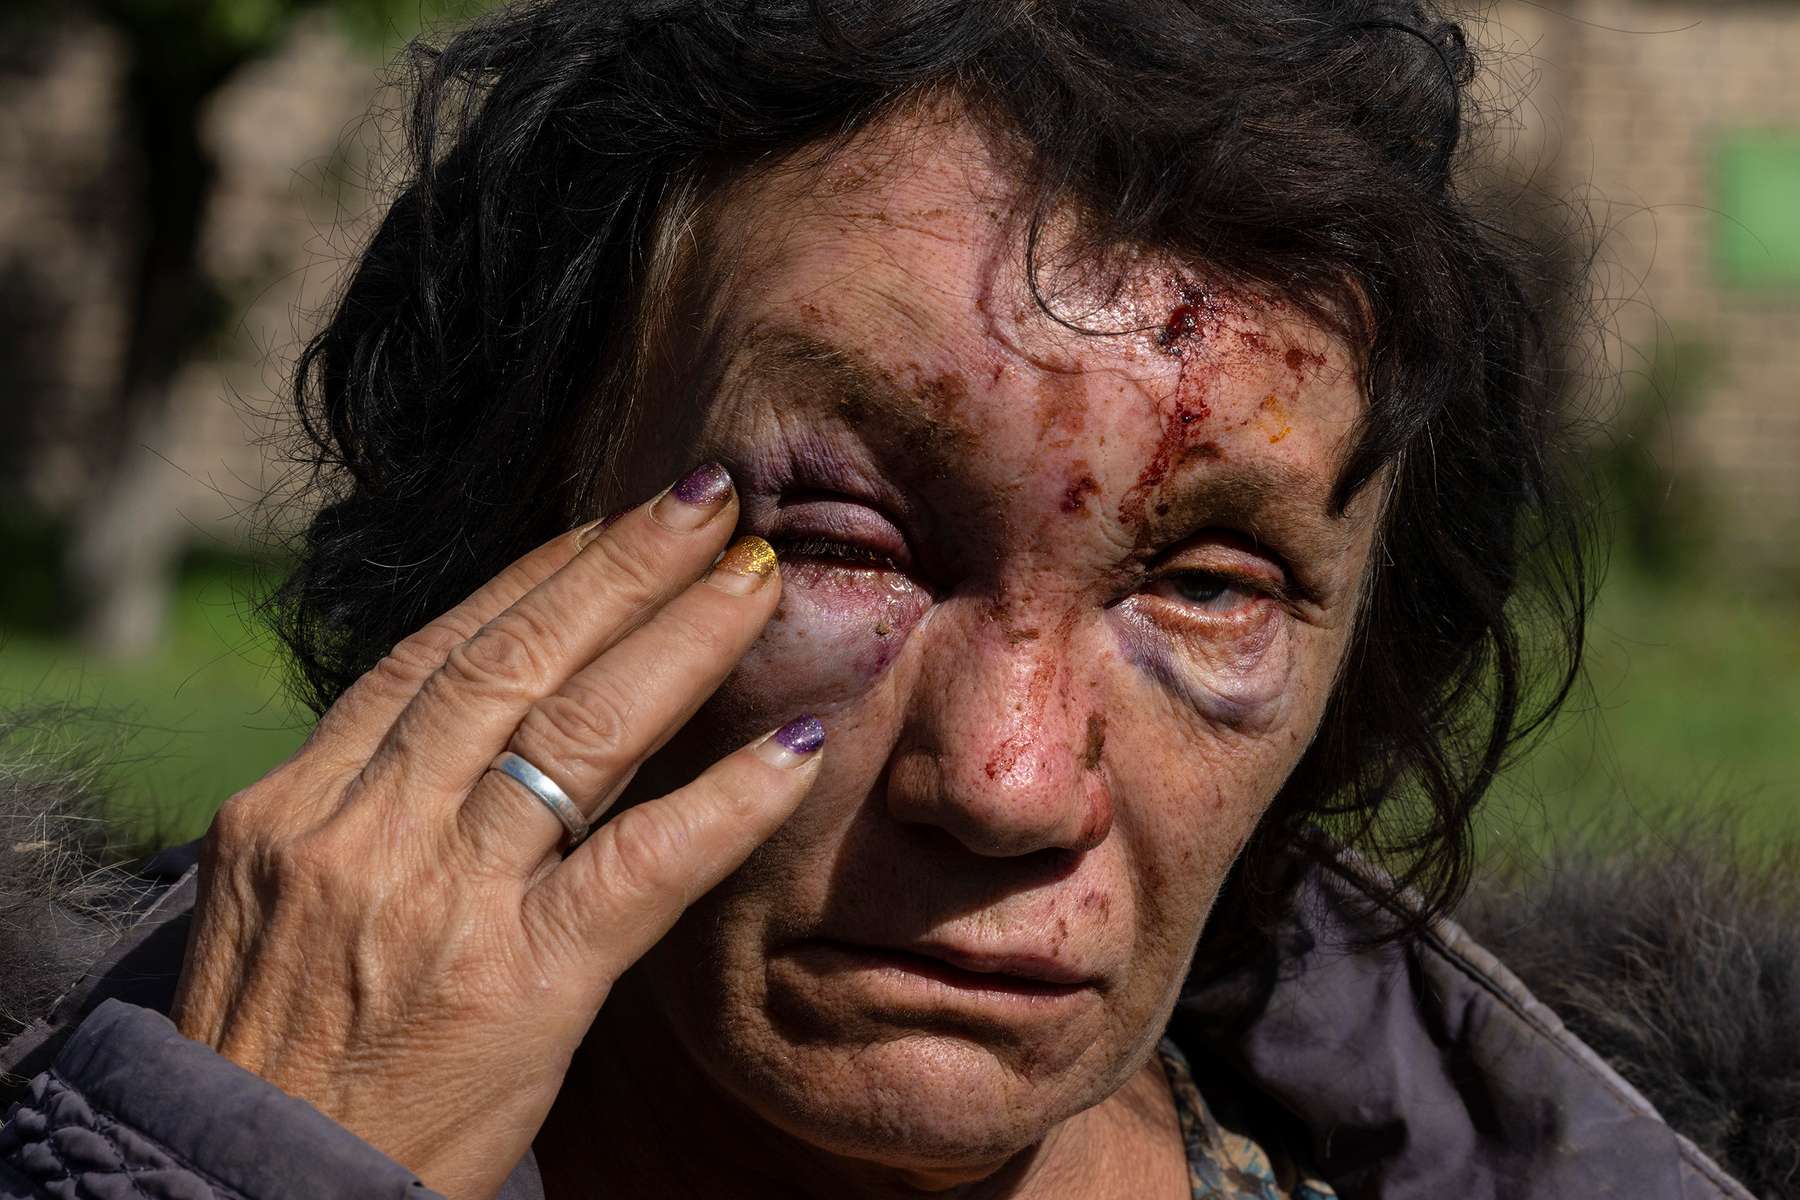 KRASNOTORKA, UKRAINE - Leda Buzinna, 56, stands outside her home, that was seriously damaged by shelling overnight when two S-300 missiles hit a rural neighborhood on October 4, 2022 outside of Kramatorsk district in Krasnotorka, Ukraine. Leda has facial injuries that were treated in a local hospital and she was released, her husband injured his leg in the attack. They have been living in the home for 18 years. They will get help for home repair from the government. Leda was sleeping when the missile hit their bedroom..(Photo by Paula Bronstein /Getty Images)